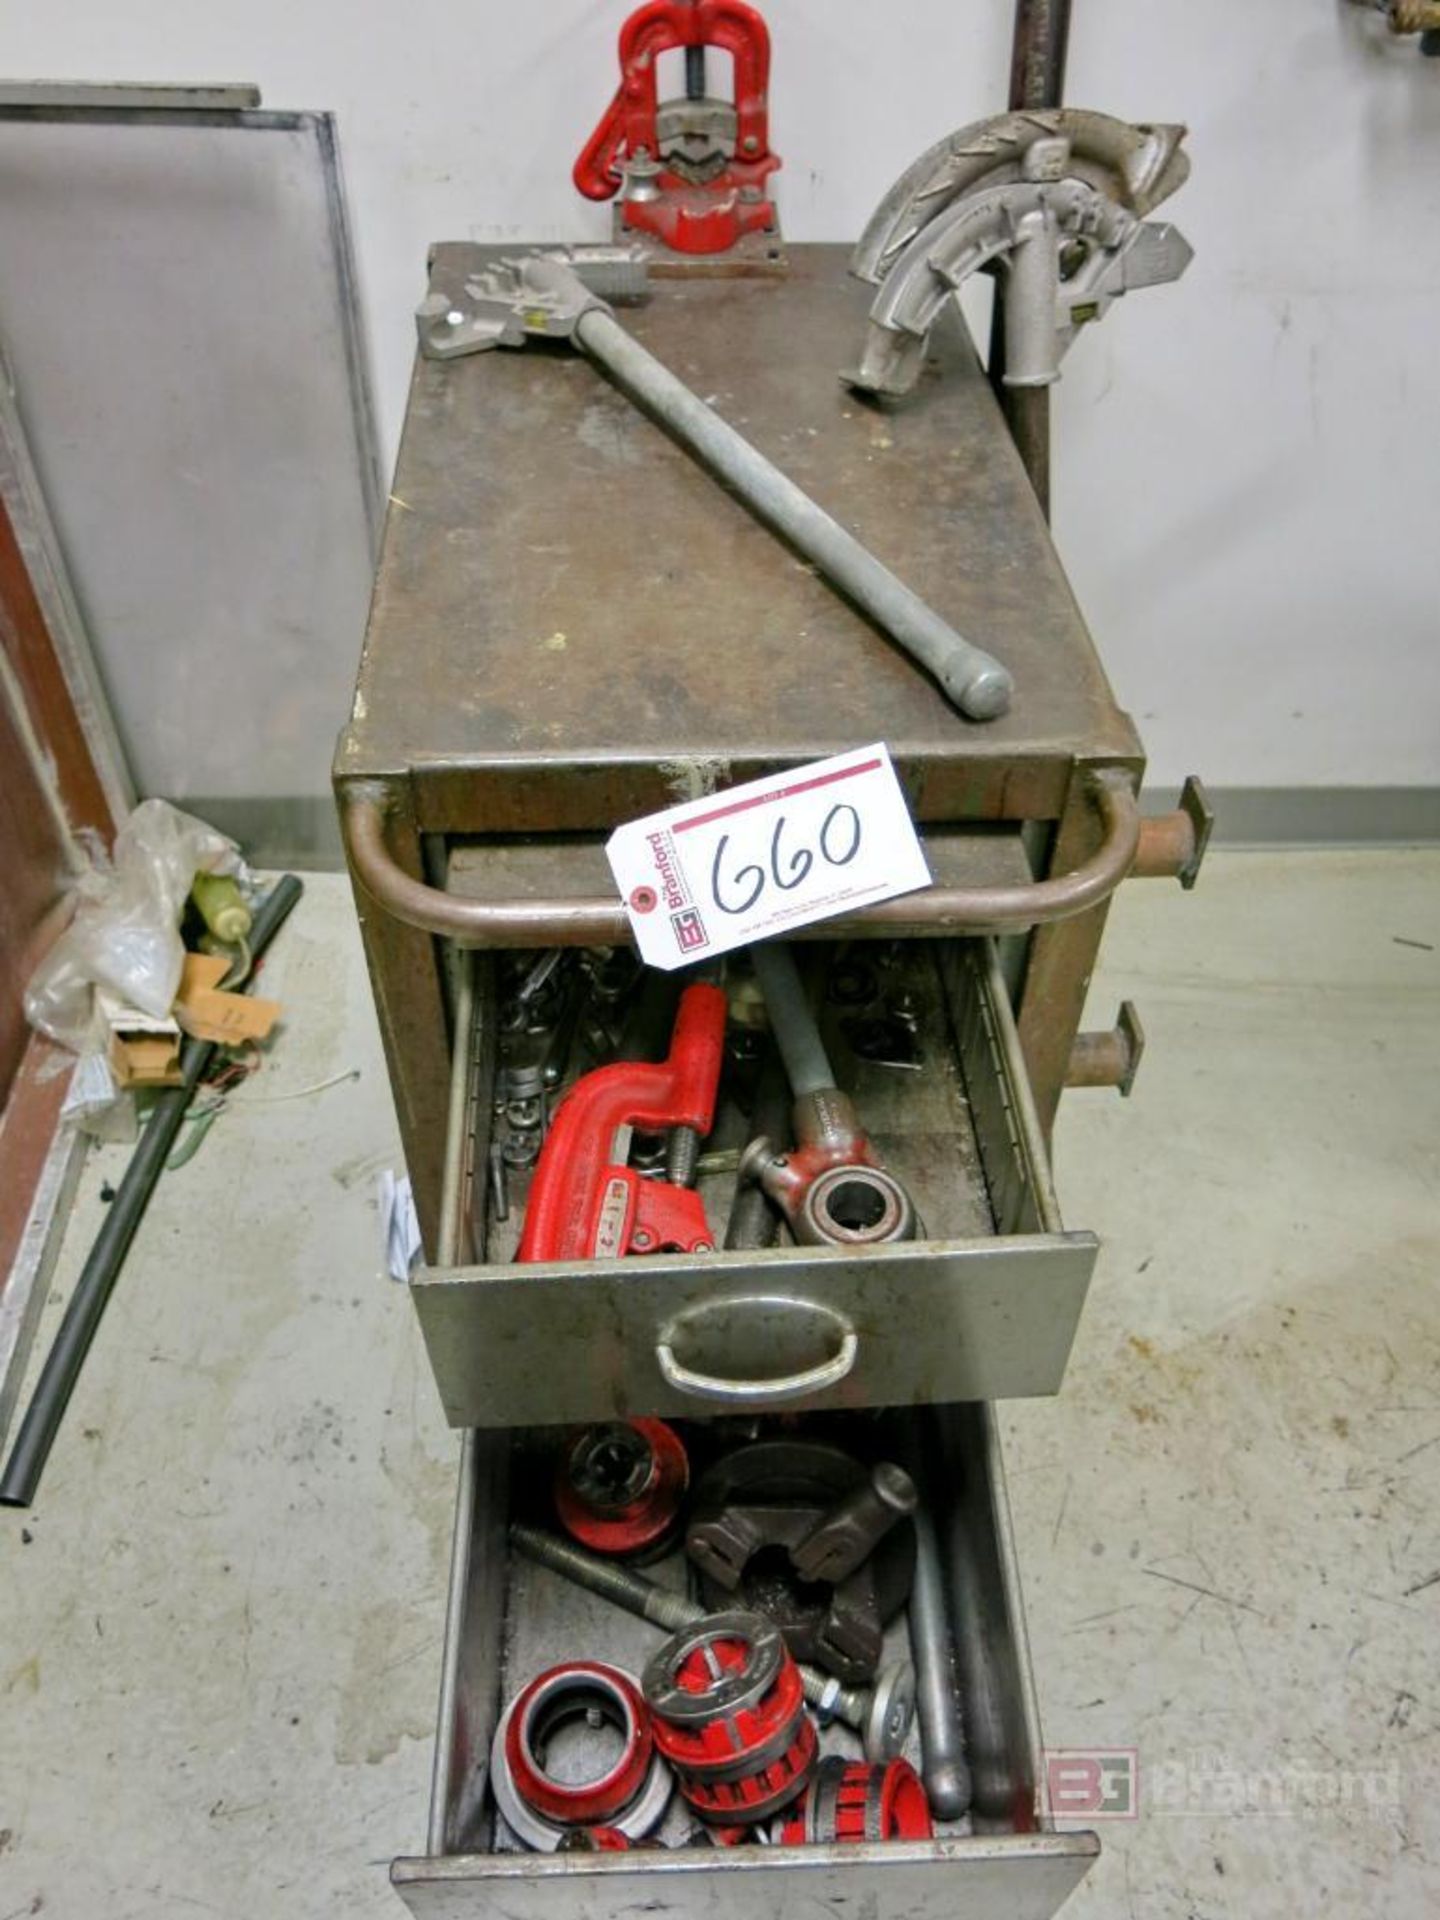 Pipe Threading Cart w/ Contents